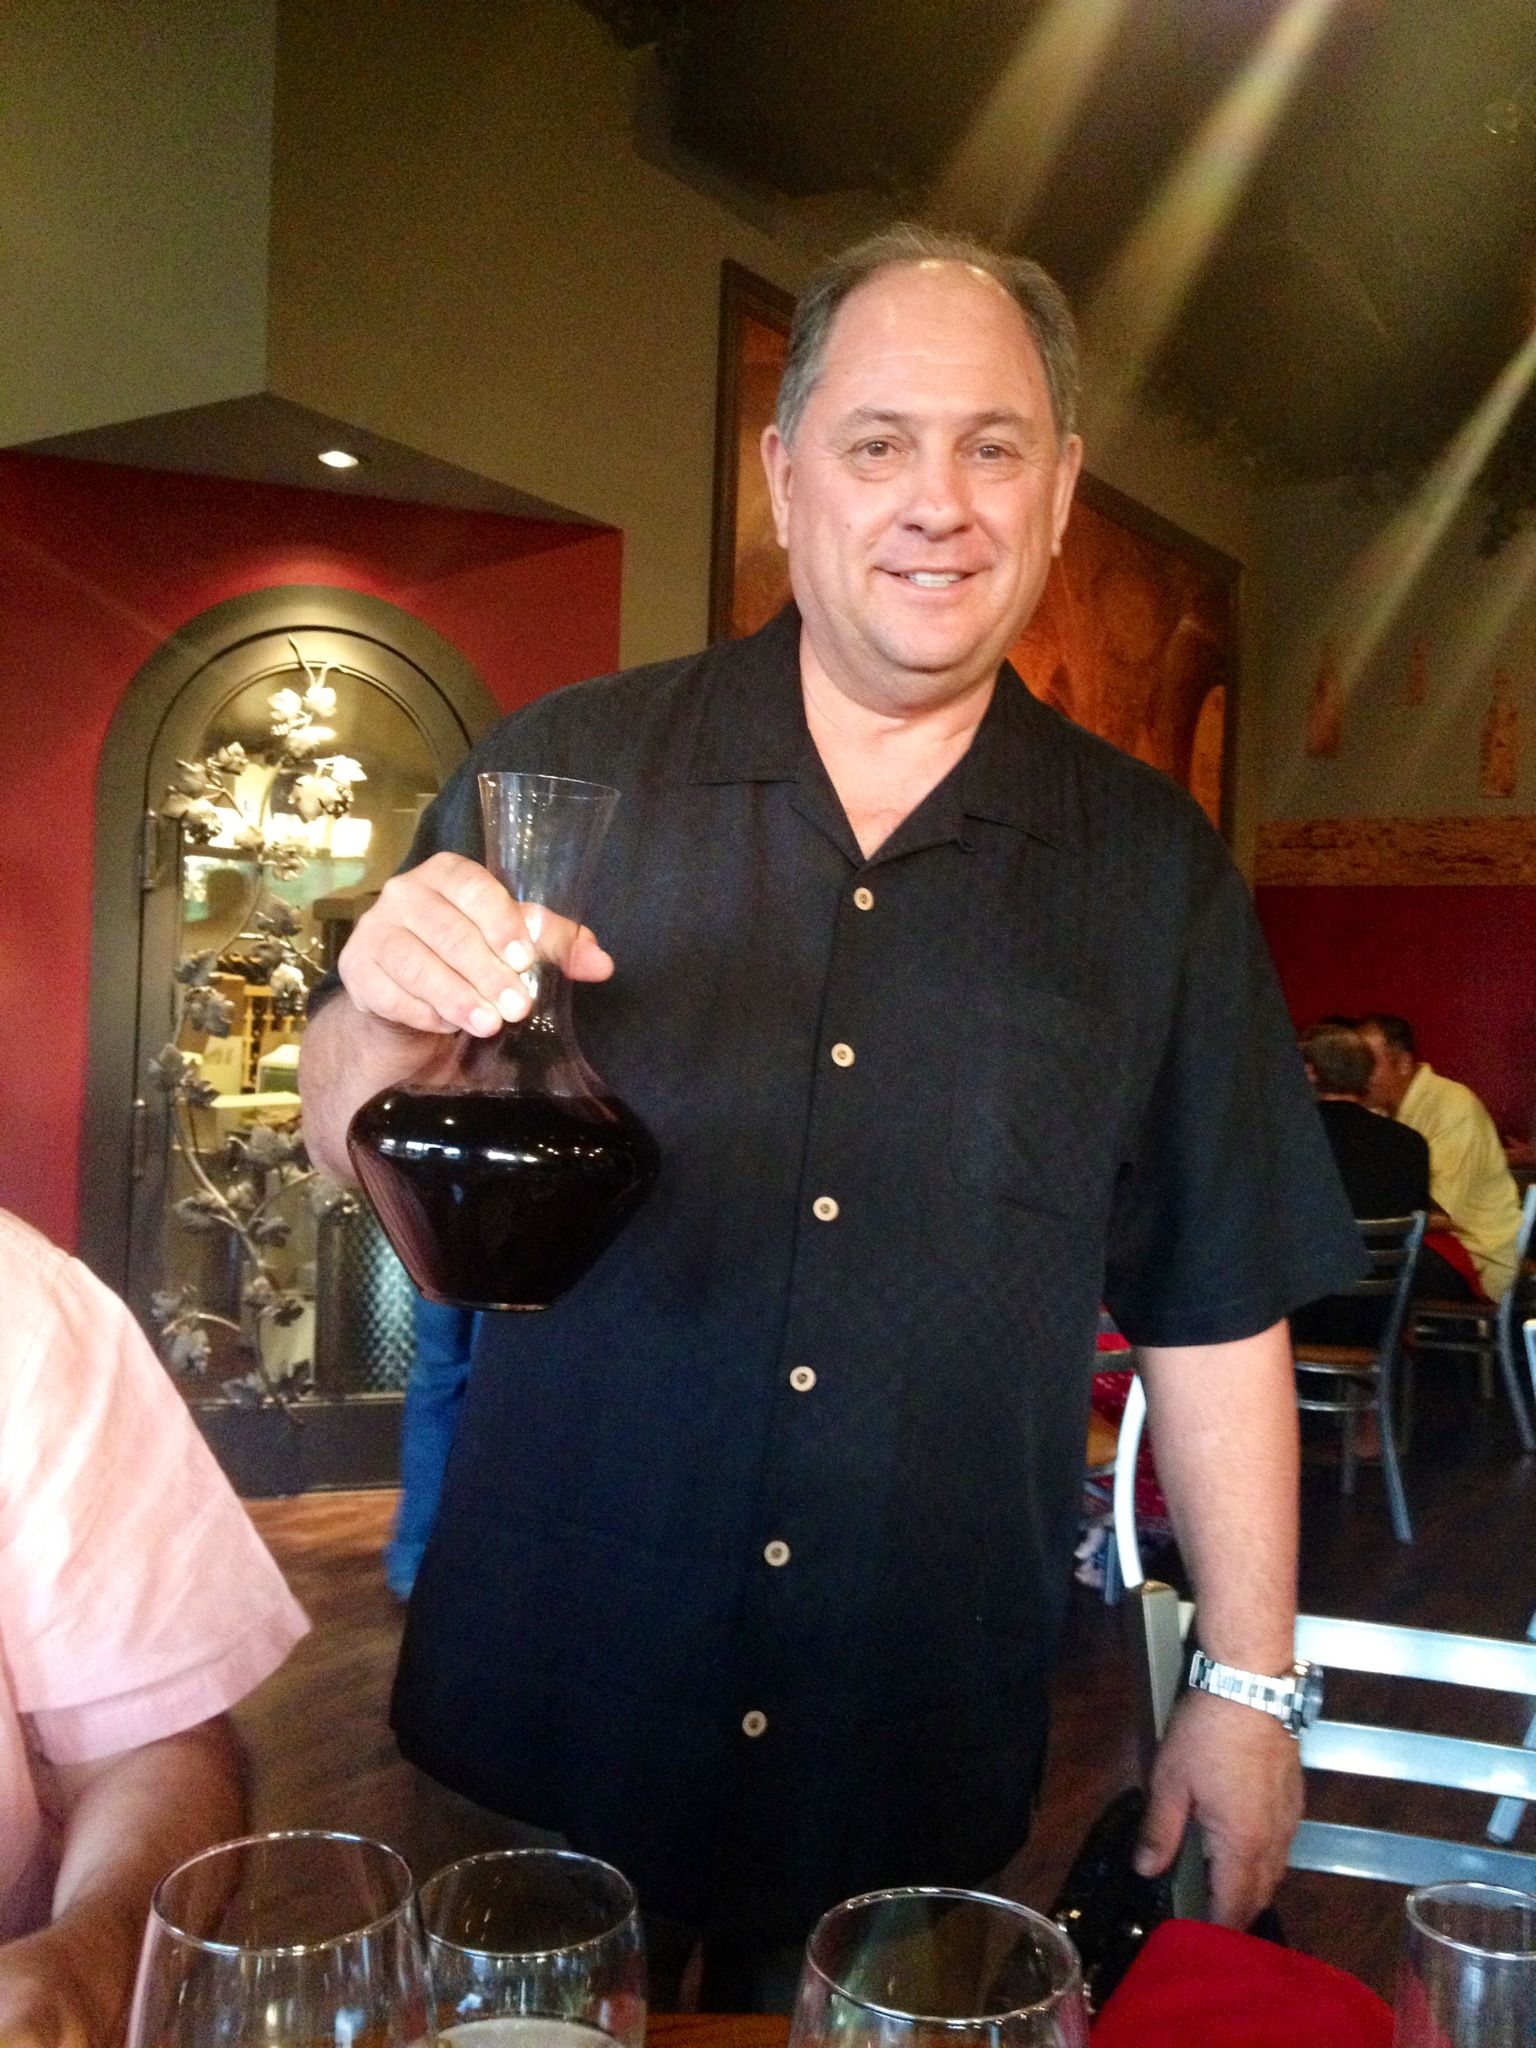 Frank Yaconis, Owner of Twisted Rose Winery and Eatery in Scottsdale, AZ